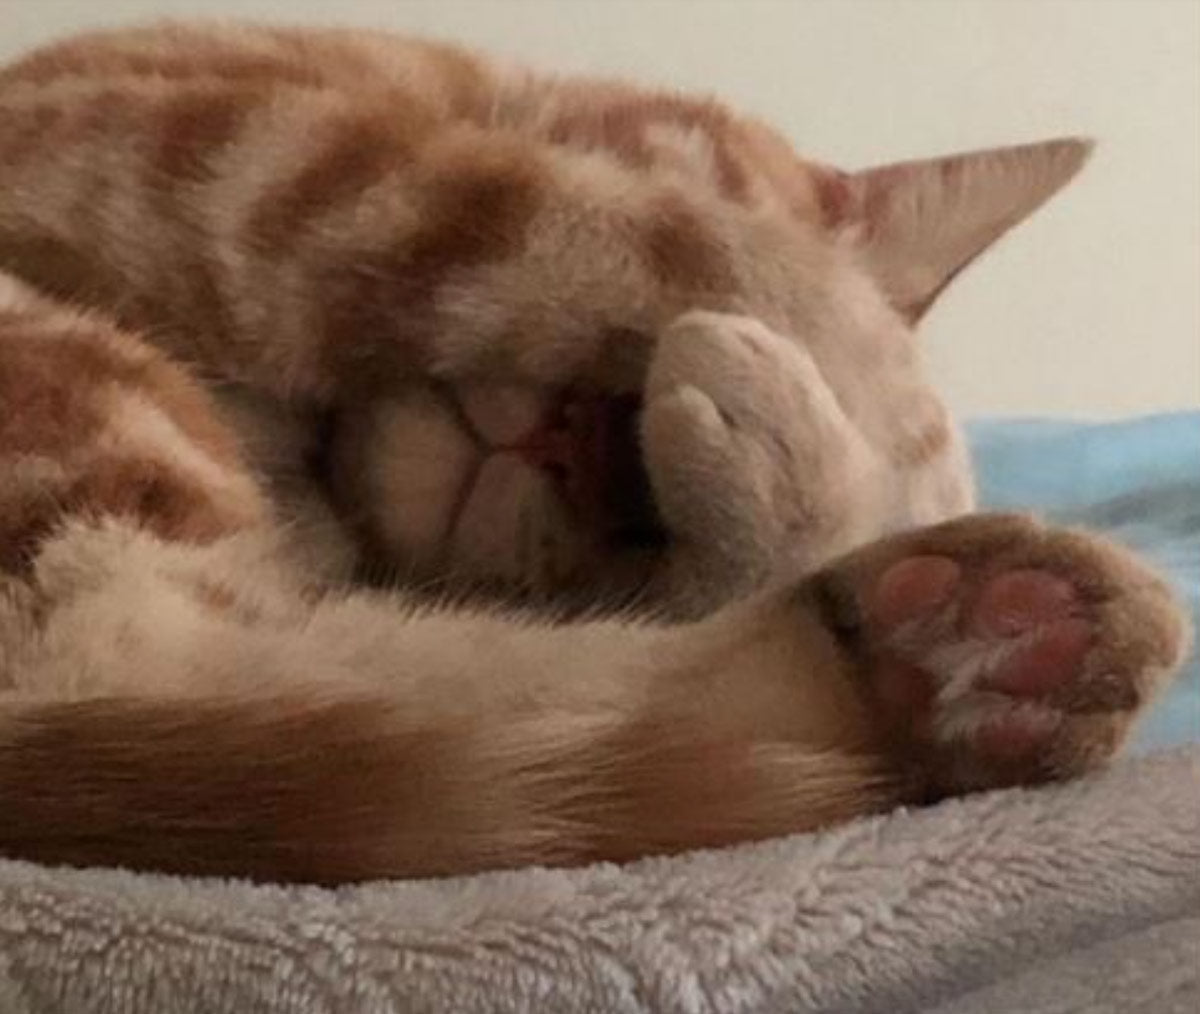 Orange cat with paws over its eyes